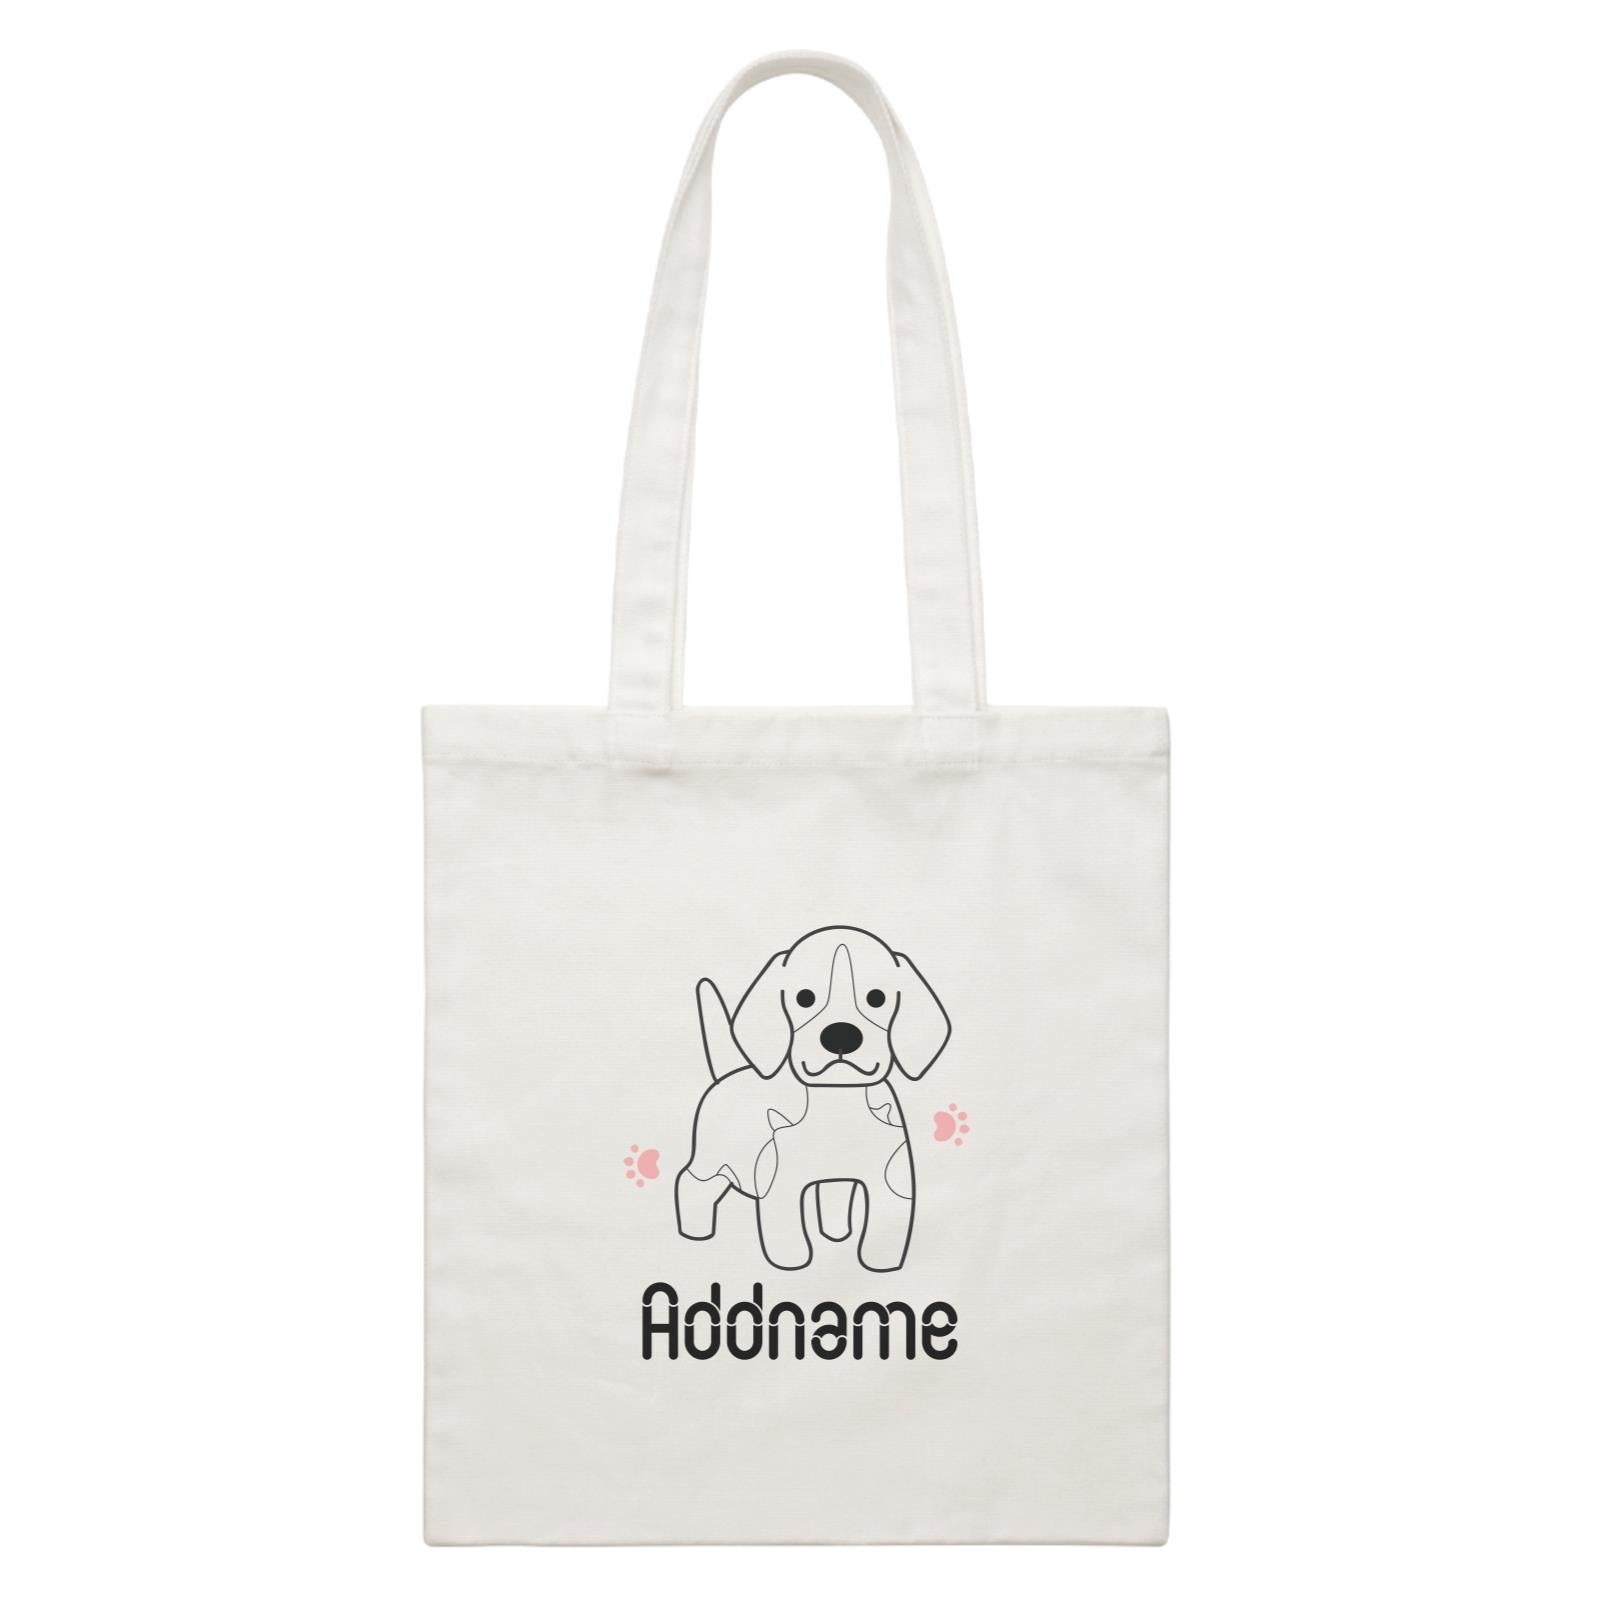 Coloring Outline Cute Hand Drawn Animals Dogs Beagle Addname White White Canvas Bag